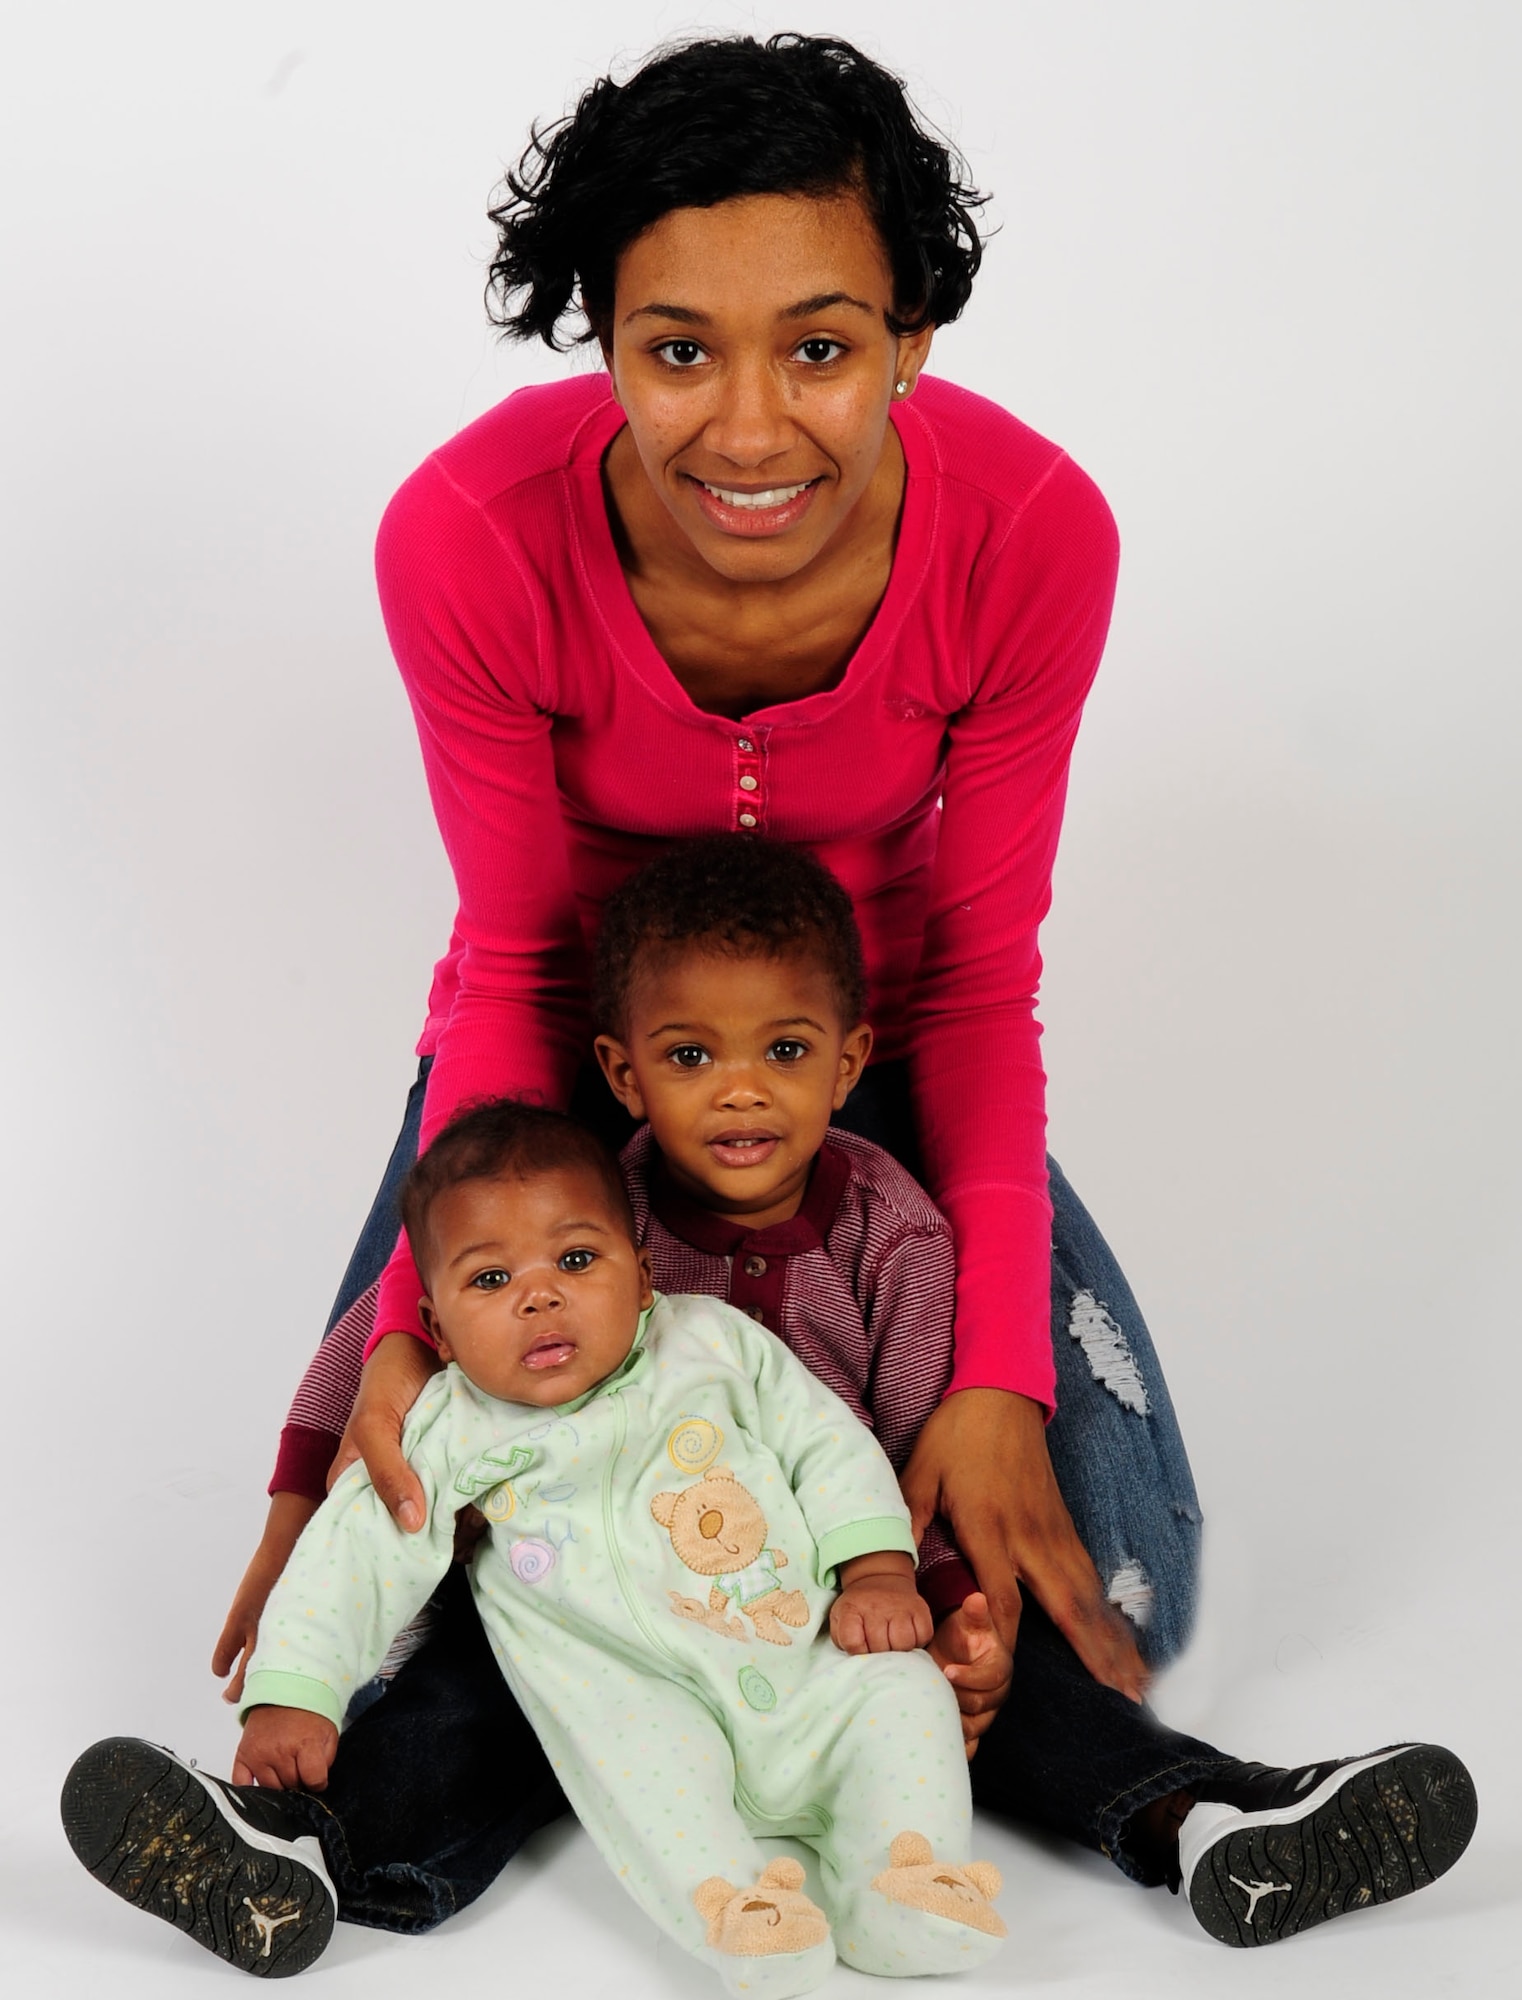 Jenay Randolph, mother of two, poses for a picture with her children Nov. 25, 2013 at MacDill Air Force Base, Fla. Randolph is the mother of two under the age of two that finds the balance between single motherhood and active-duty Air Force. The son, Jaylen Brown, is 17 months and the daughter, Jordyn, is four months.(U.S. Air Force photo by Senior Airman Shandresha Mitchell/Released) 